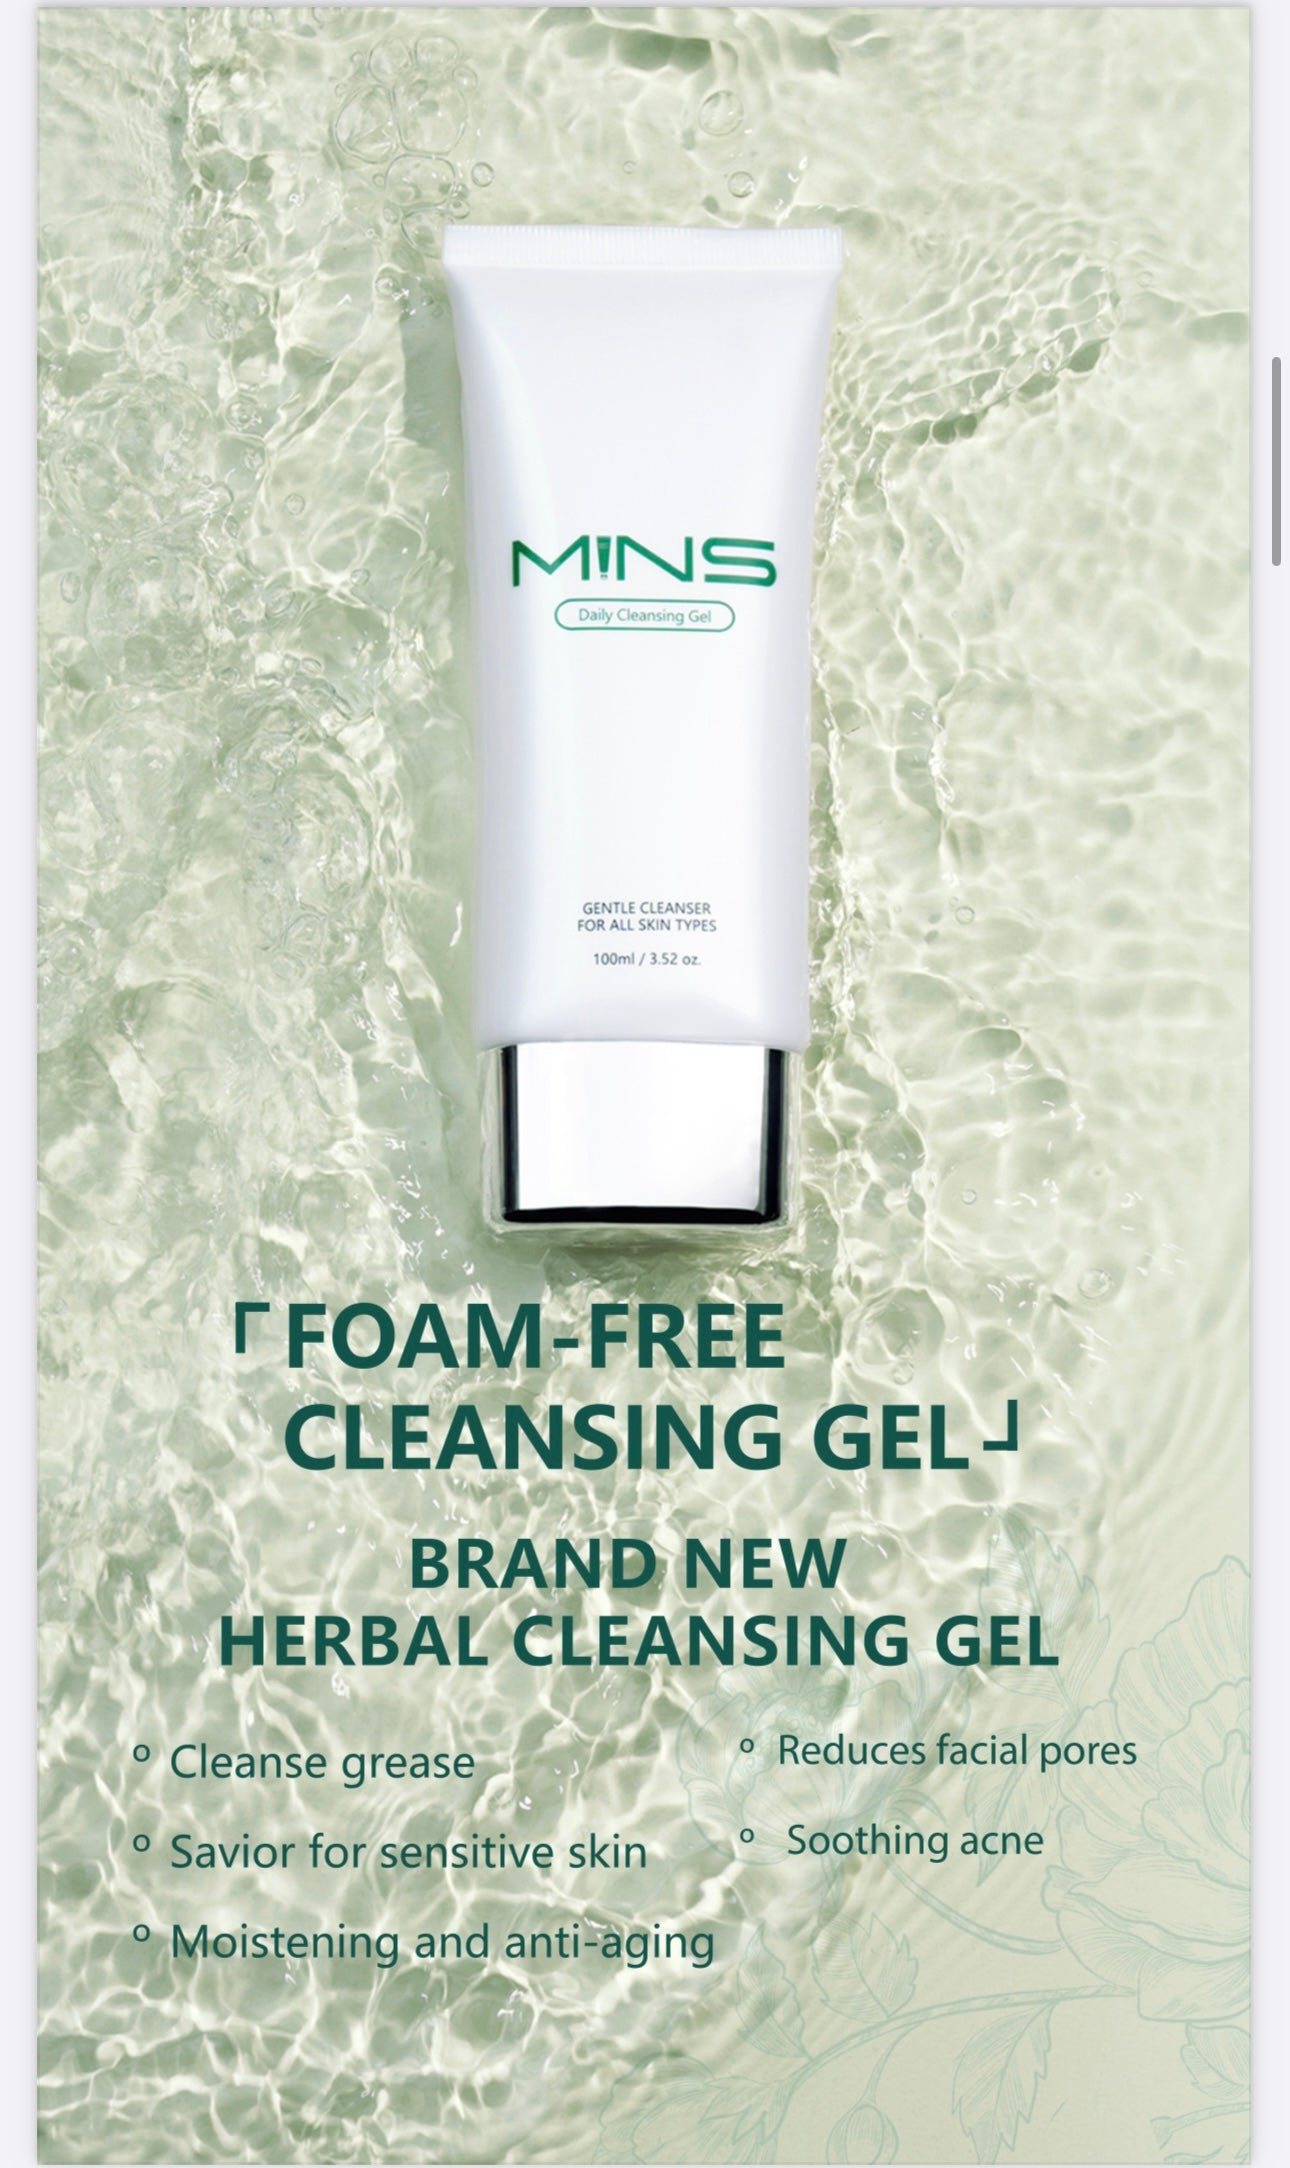 MINS Daily Cleansing Gel and Toner Pads